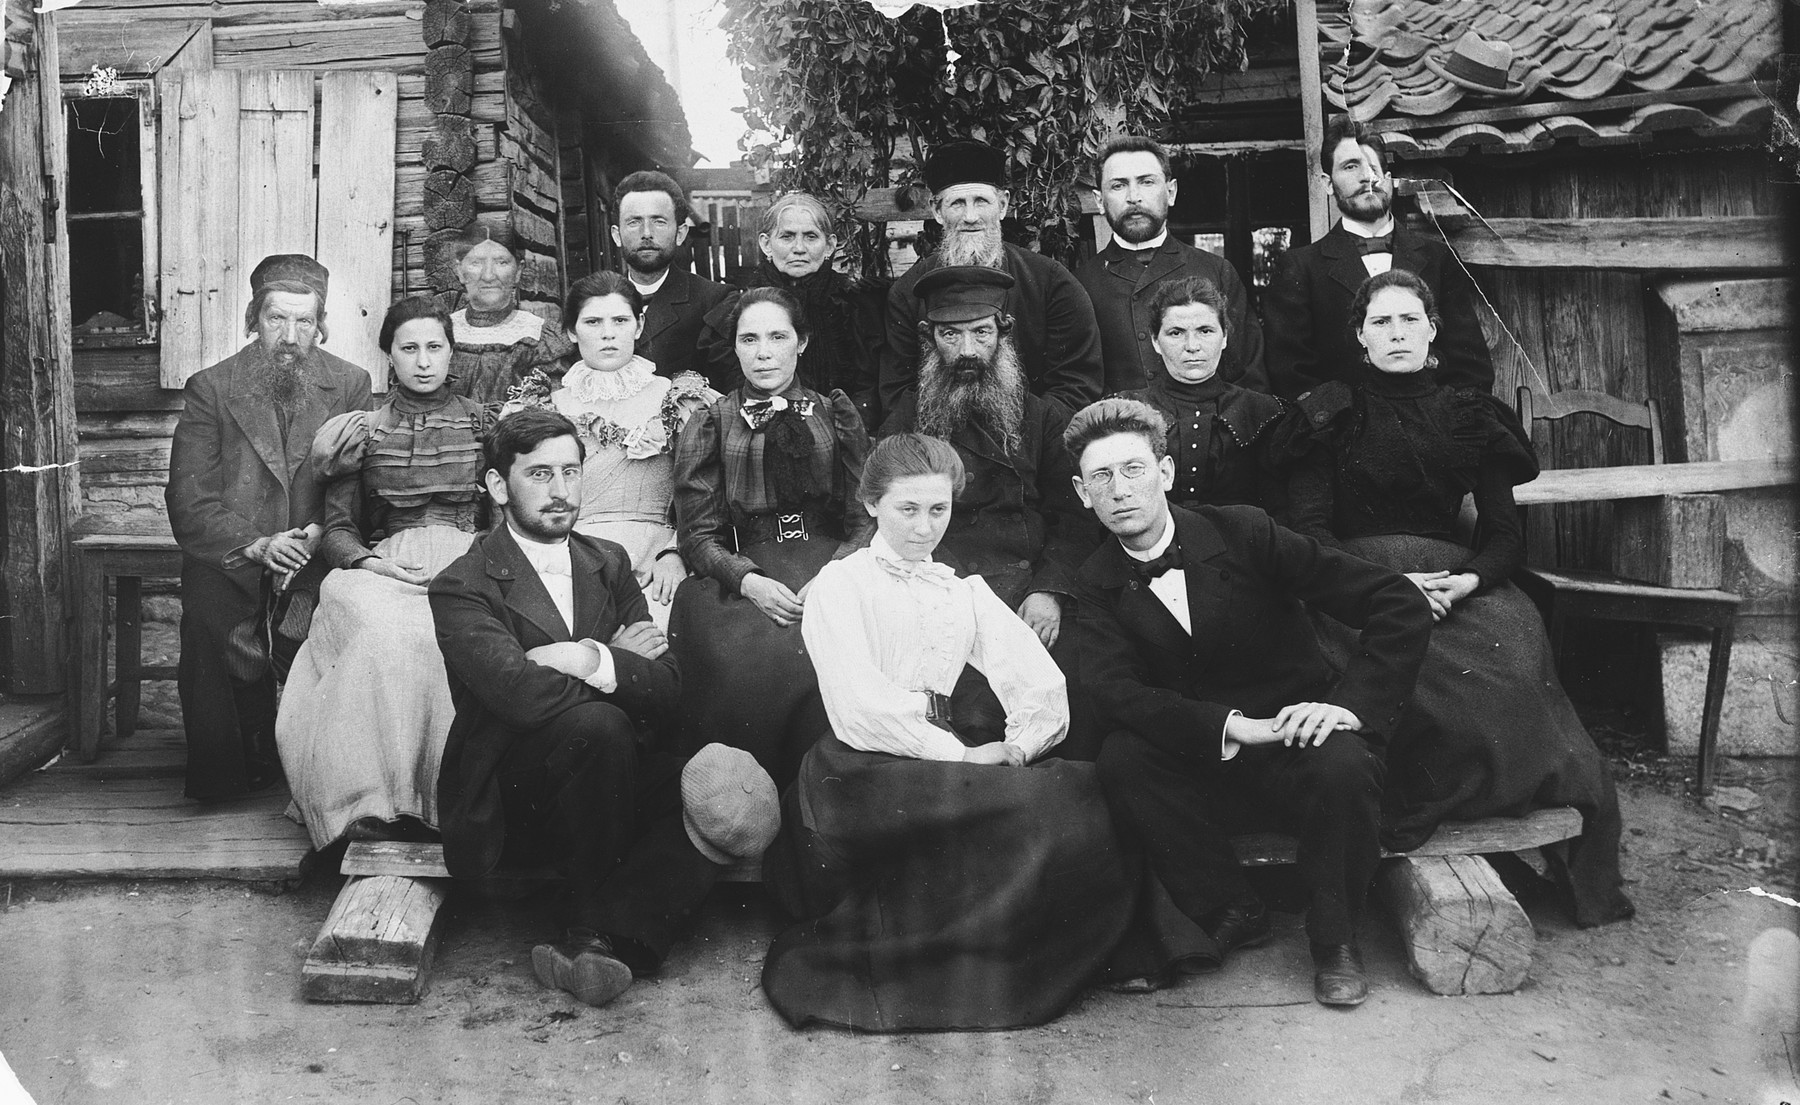 Portrait of the Magid family in front of their home in Snipishok, on the outskirts of Vilna.  

Pictured is Abram (Dov Ber) Magid (bottom row, right) with his sisters Tzivia, Rivka, Rachel and Esther, and other relatives.